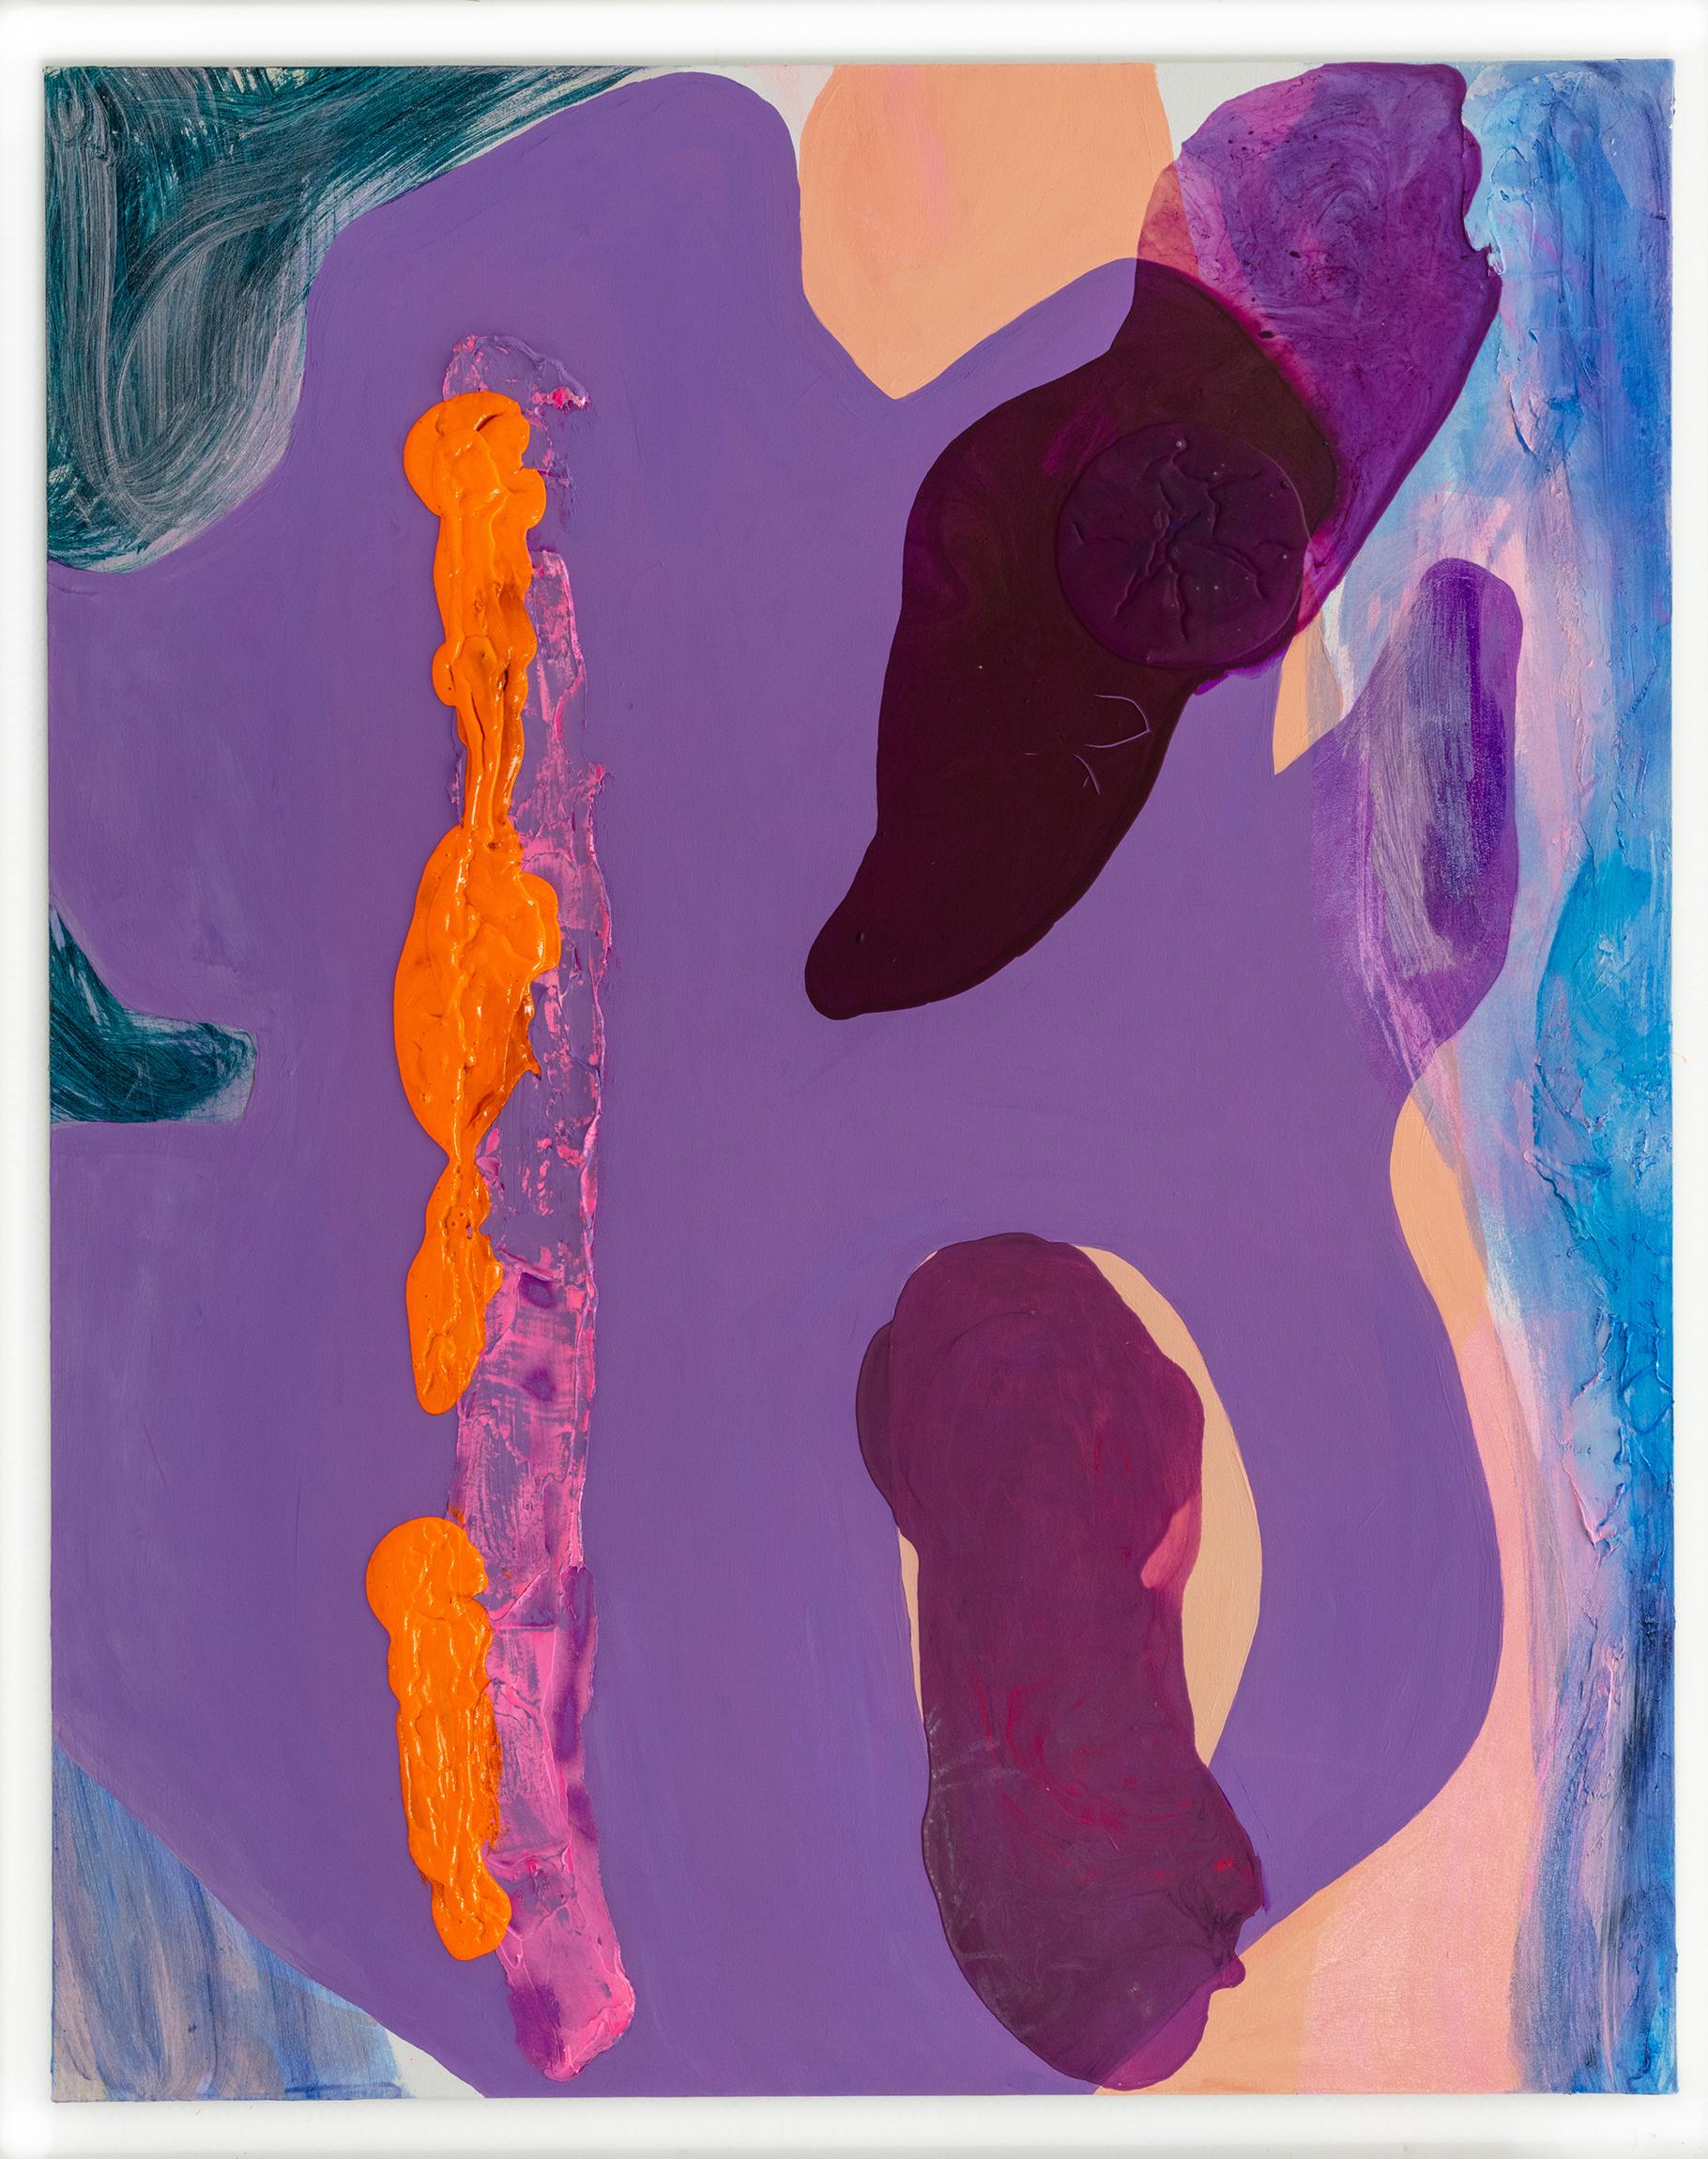 A water inspired abstract painting by New York/Hawaiian artist Debra Drexler. 60"x48" signed on reverse.  Lavender, plum, purple and violet colors overlap with peach light orange/pink forms in this large scale abstract painting.   A central impasto